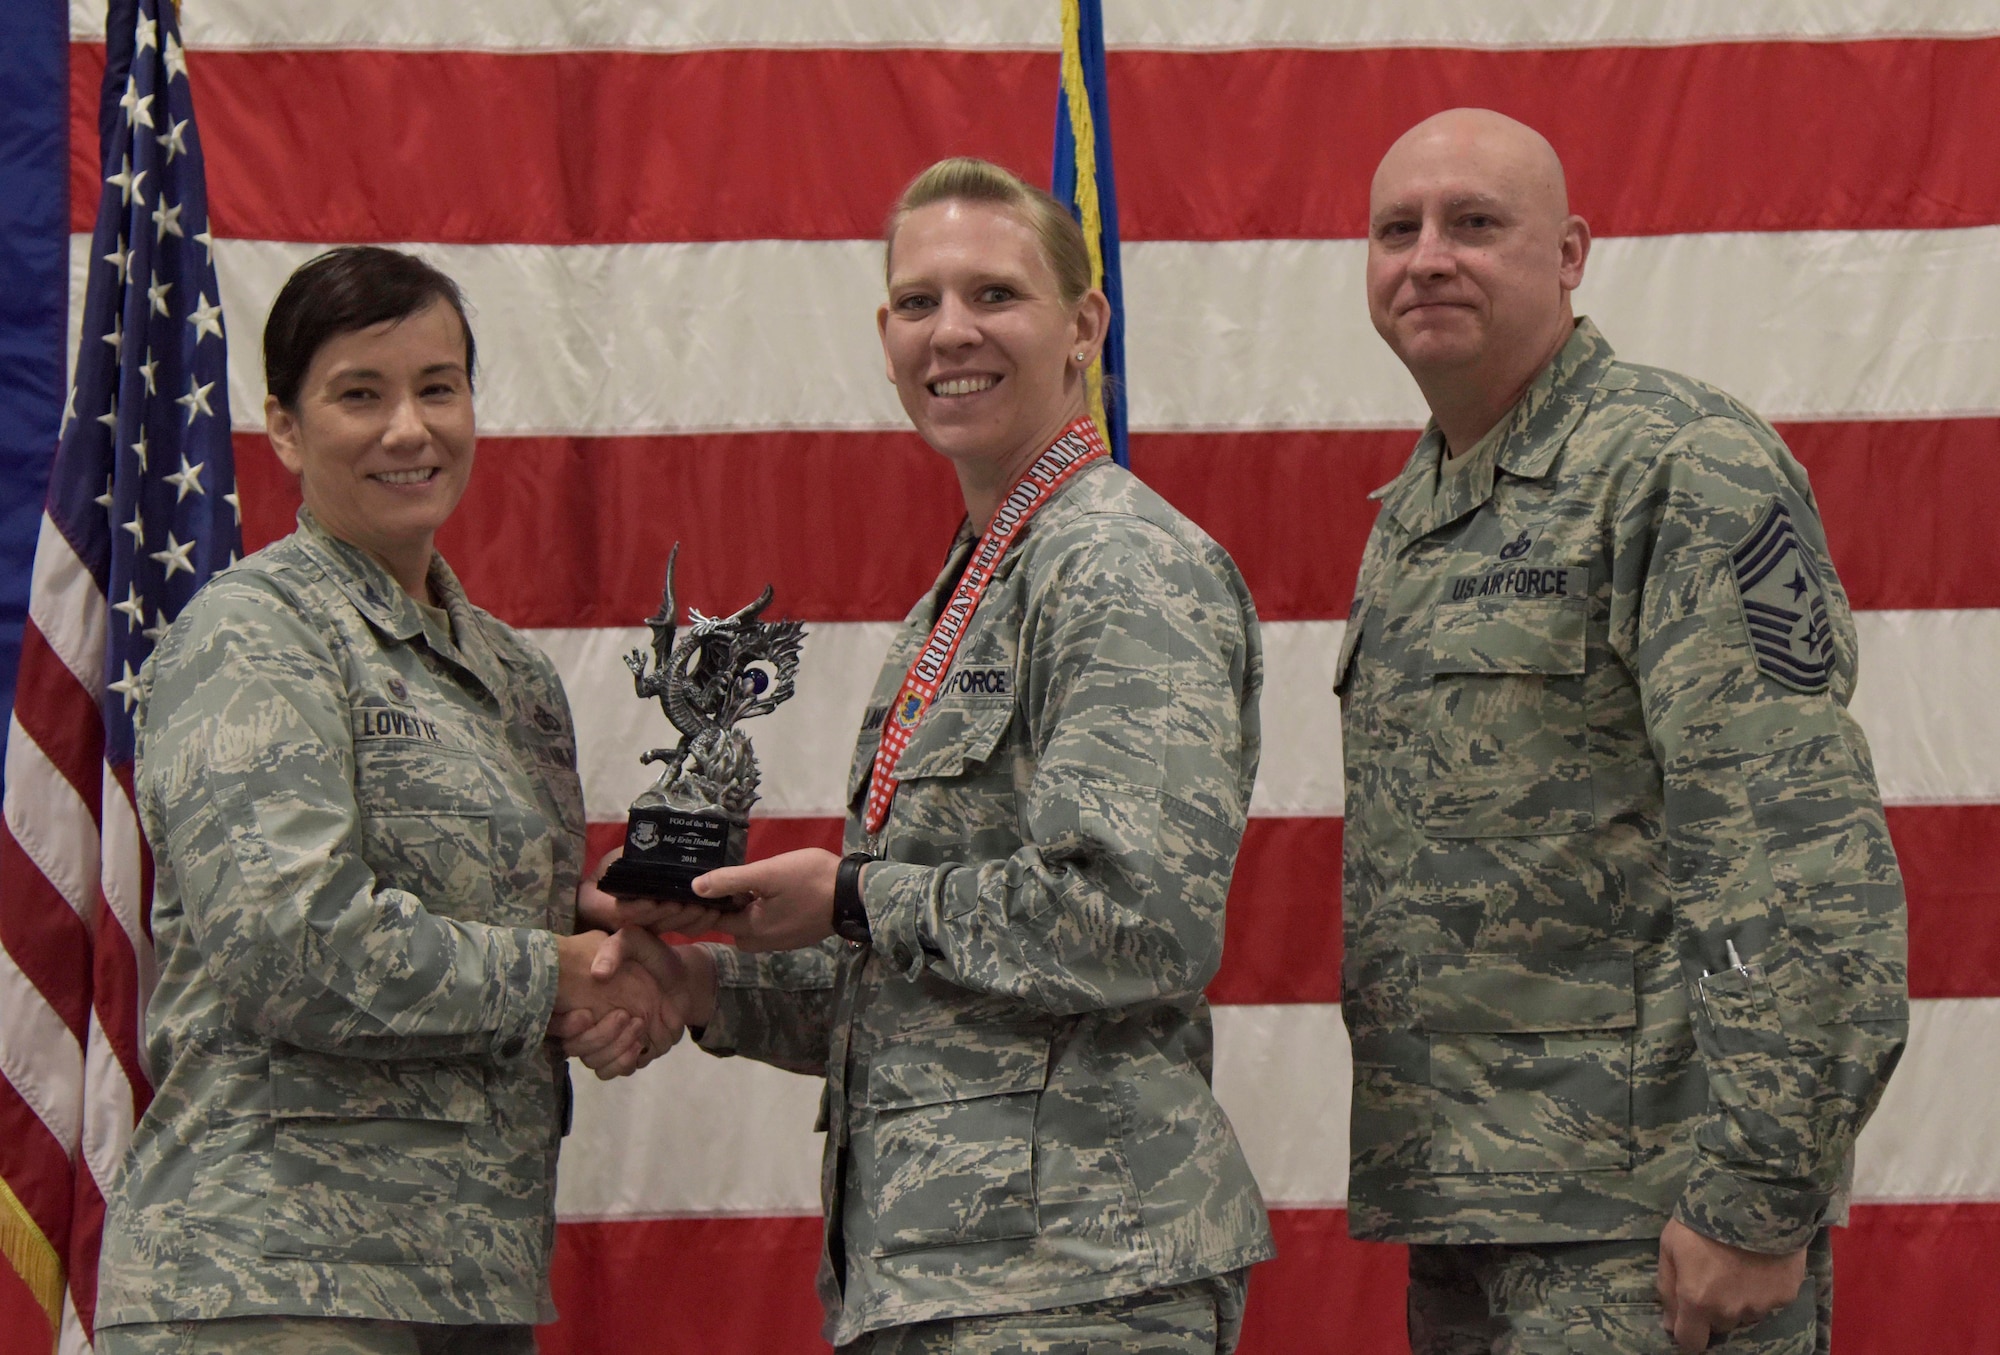 U.S. Air Force Col. Debra Lovette, 81st Training Wing commander, and Chief Master Sgt. David Pizzuto, 81st TRW command chief, present Maj. Erin Holland, 81st Force Support Squadron operations officer, with the Field Grade Officer of the Year award during the 81st Training Wing's 2018 Annual Awards Ceremony inside a hangar at Keesler Air Force Base, Mississippi, Feb. 1, 2019. During the ceremony, base leadership recognized outstanding Airmen and civilians from across the installation for their accomplishments throughout 2018. (U.S. Air Force photo by Kemberly Groue)